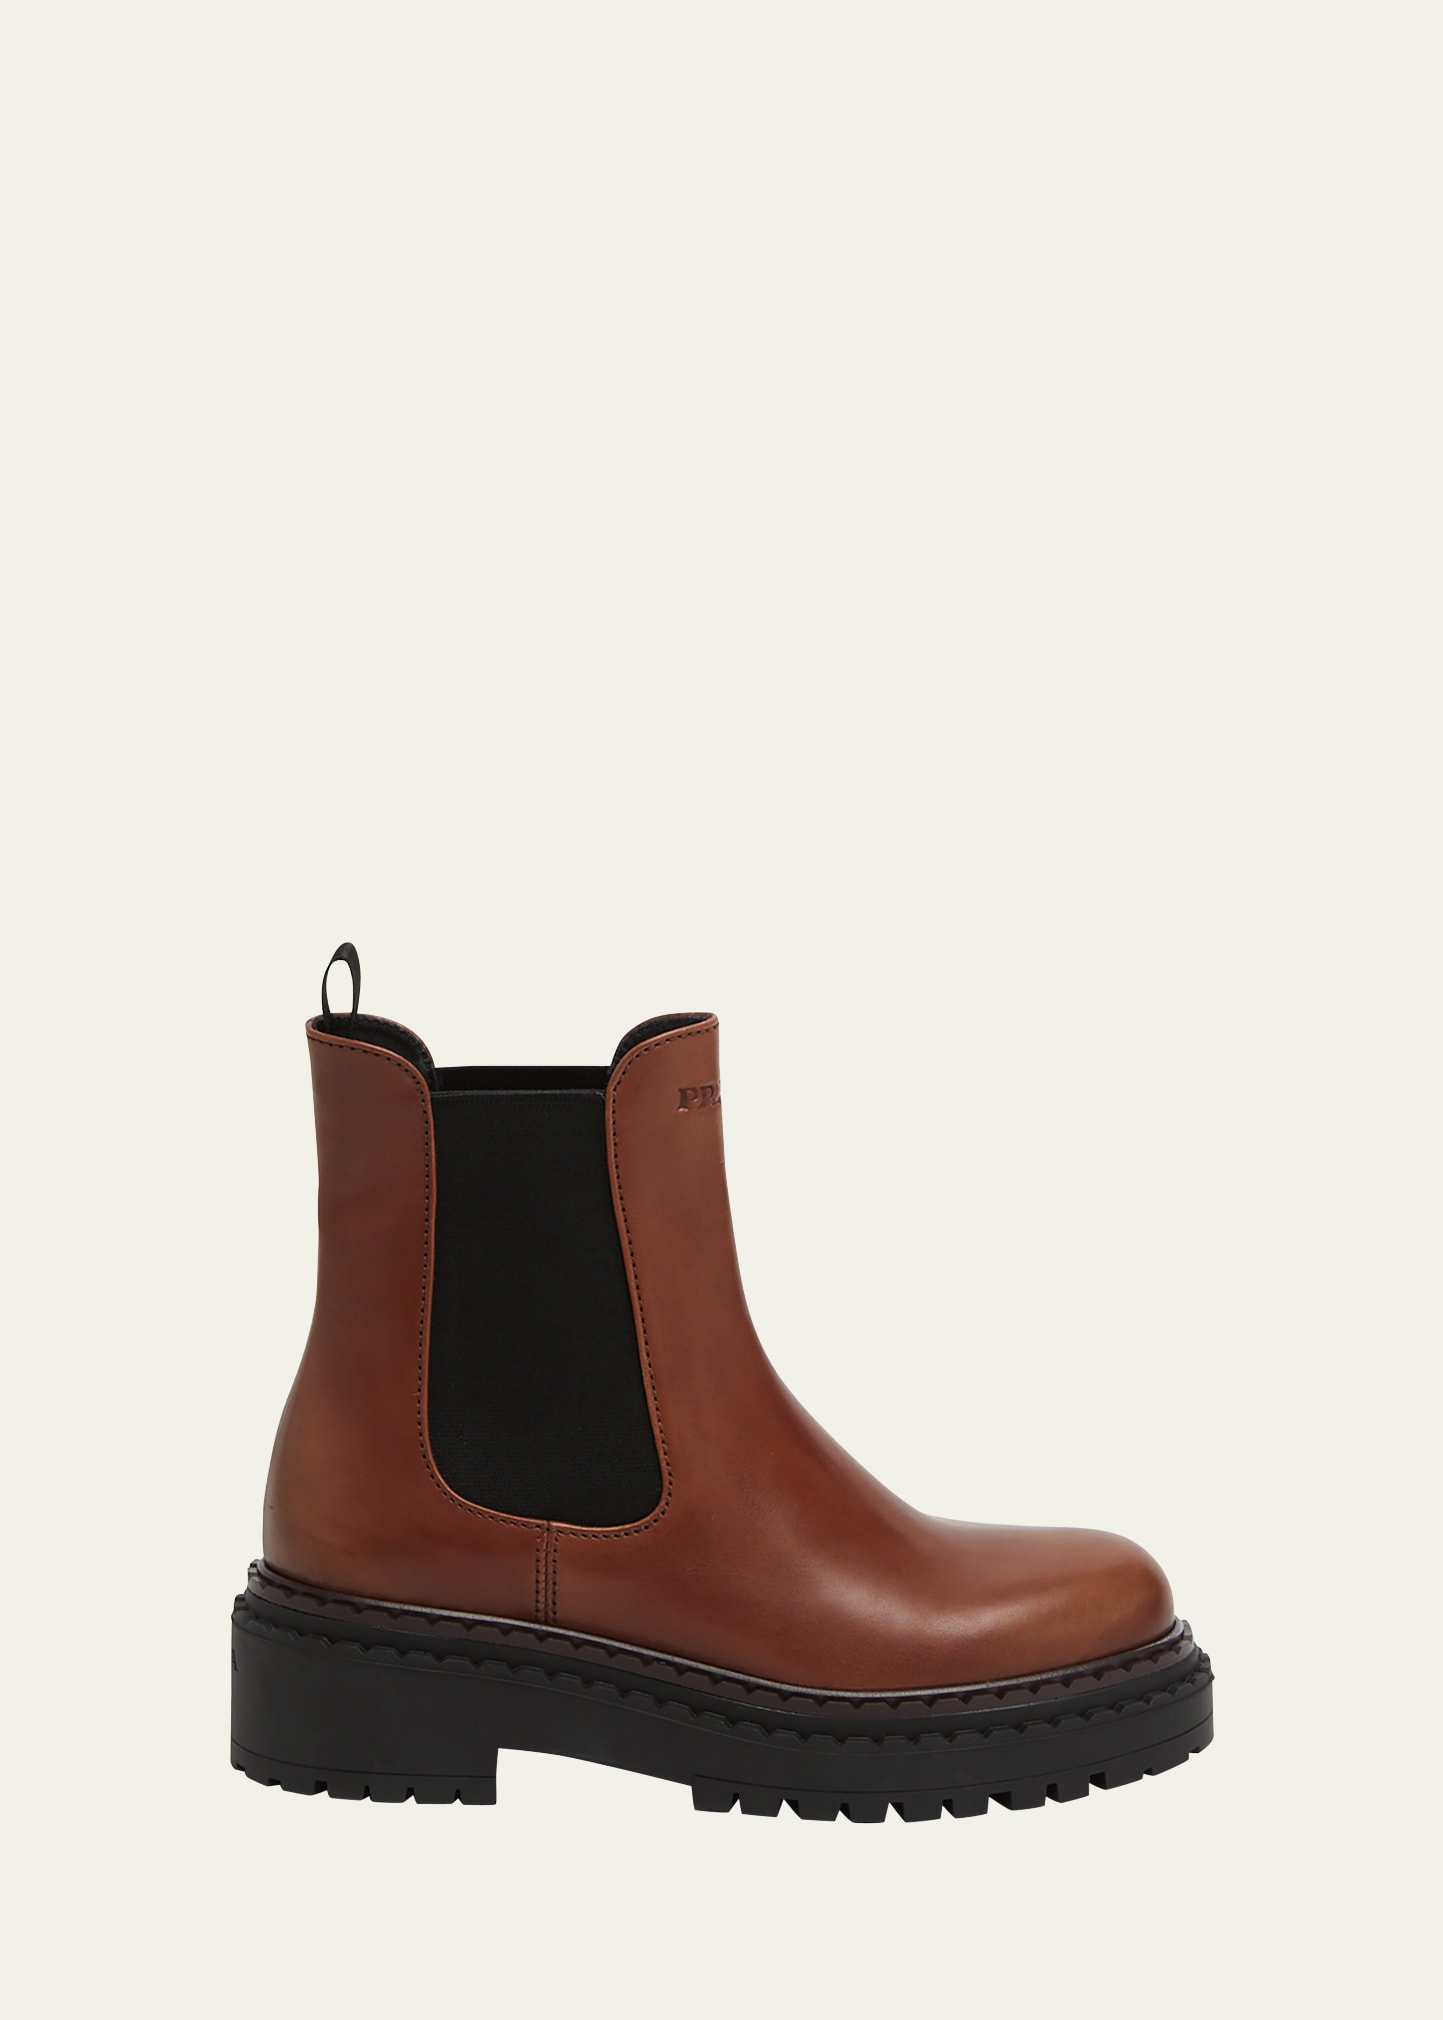 Prada Chocolate Calfskin Chelsea Ankle Boots In Brown